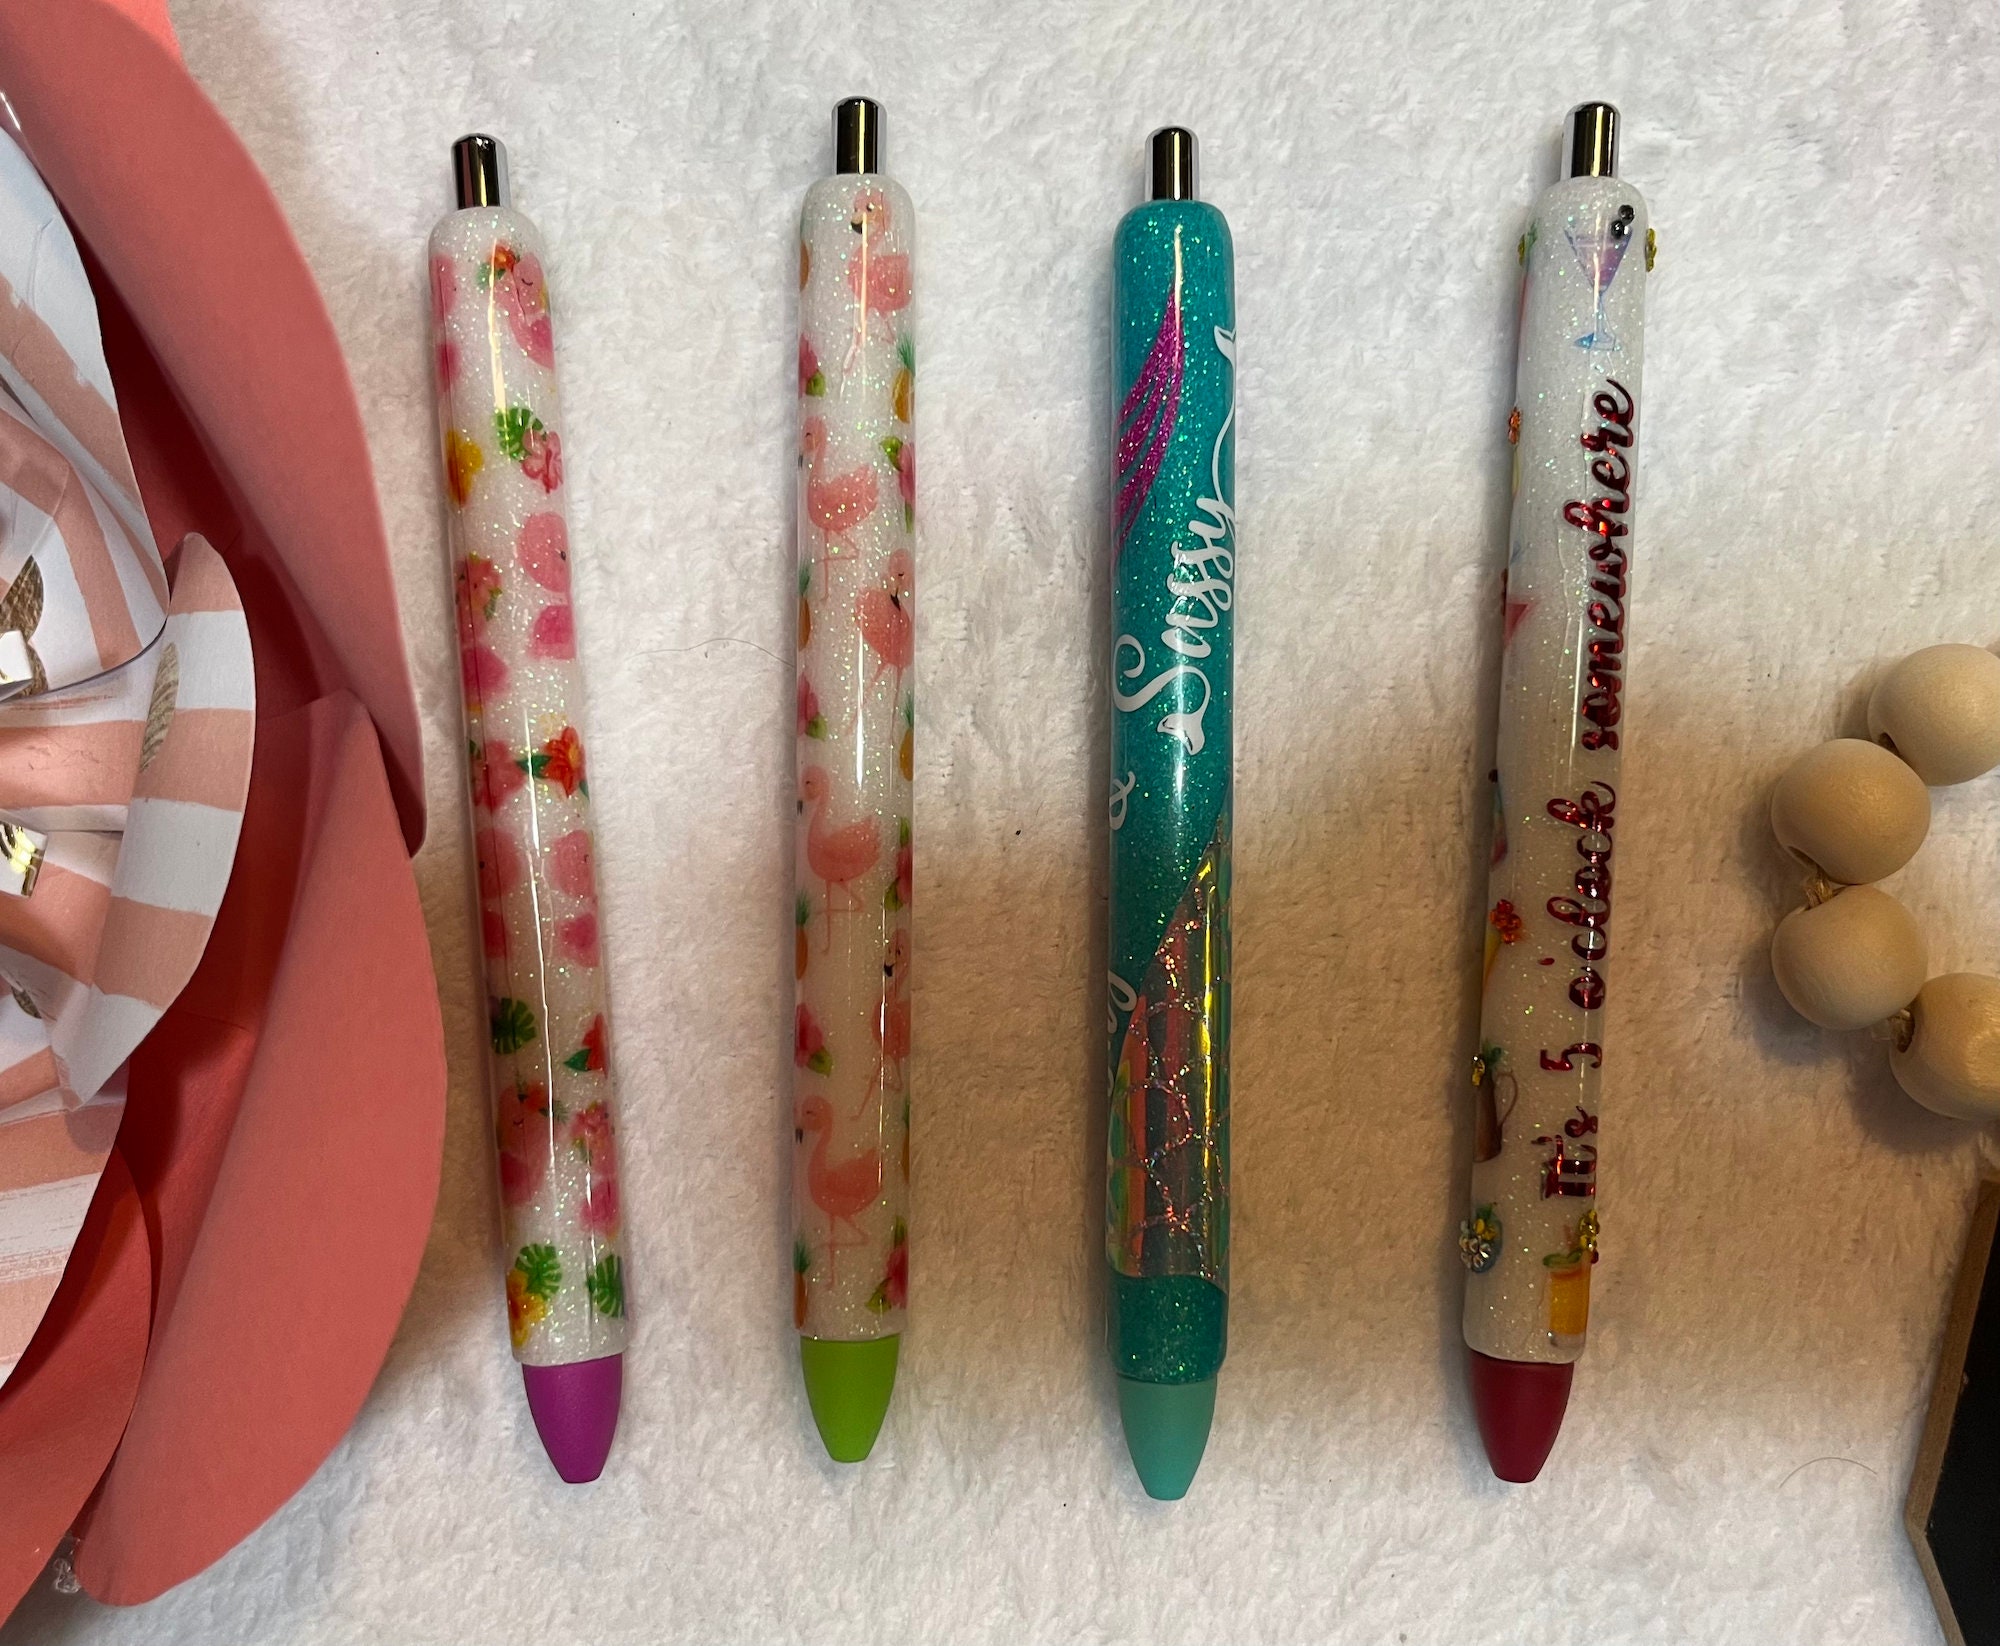 5PCS Funny Nurses Pens Set Smooth Writing Delicate Design Pen for  Valentine's Day Gift 